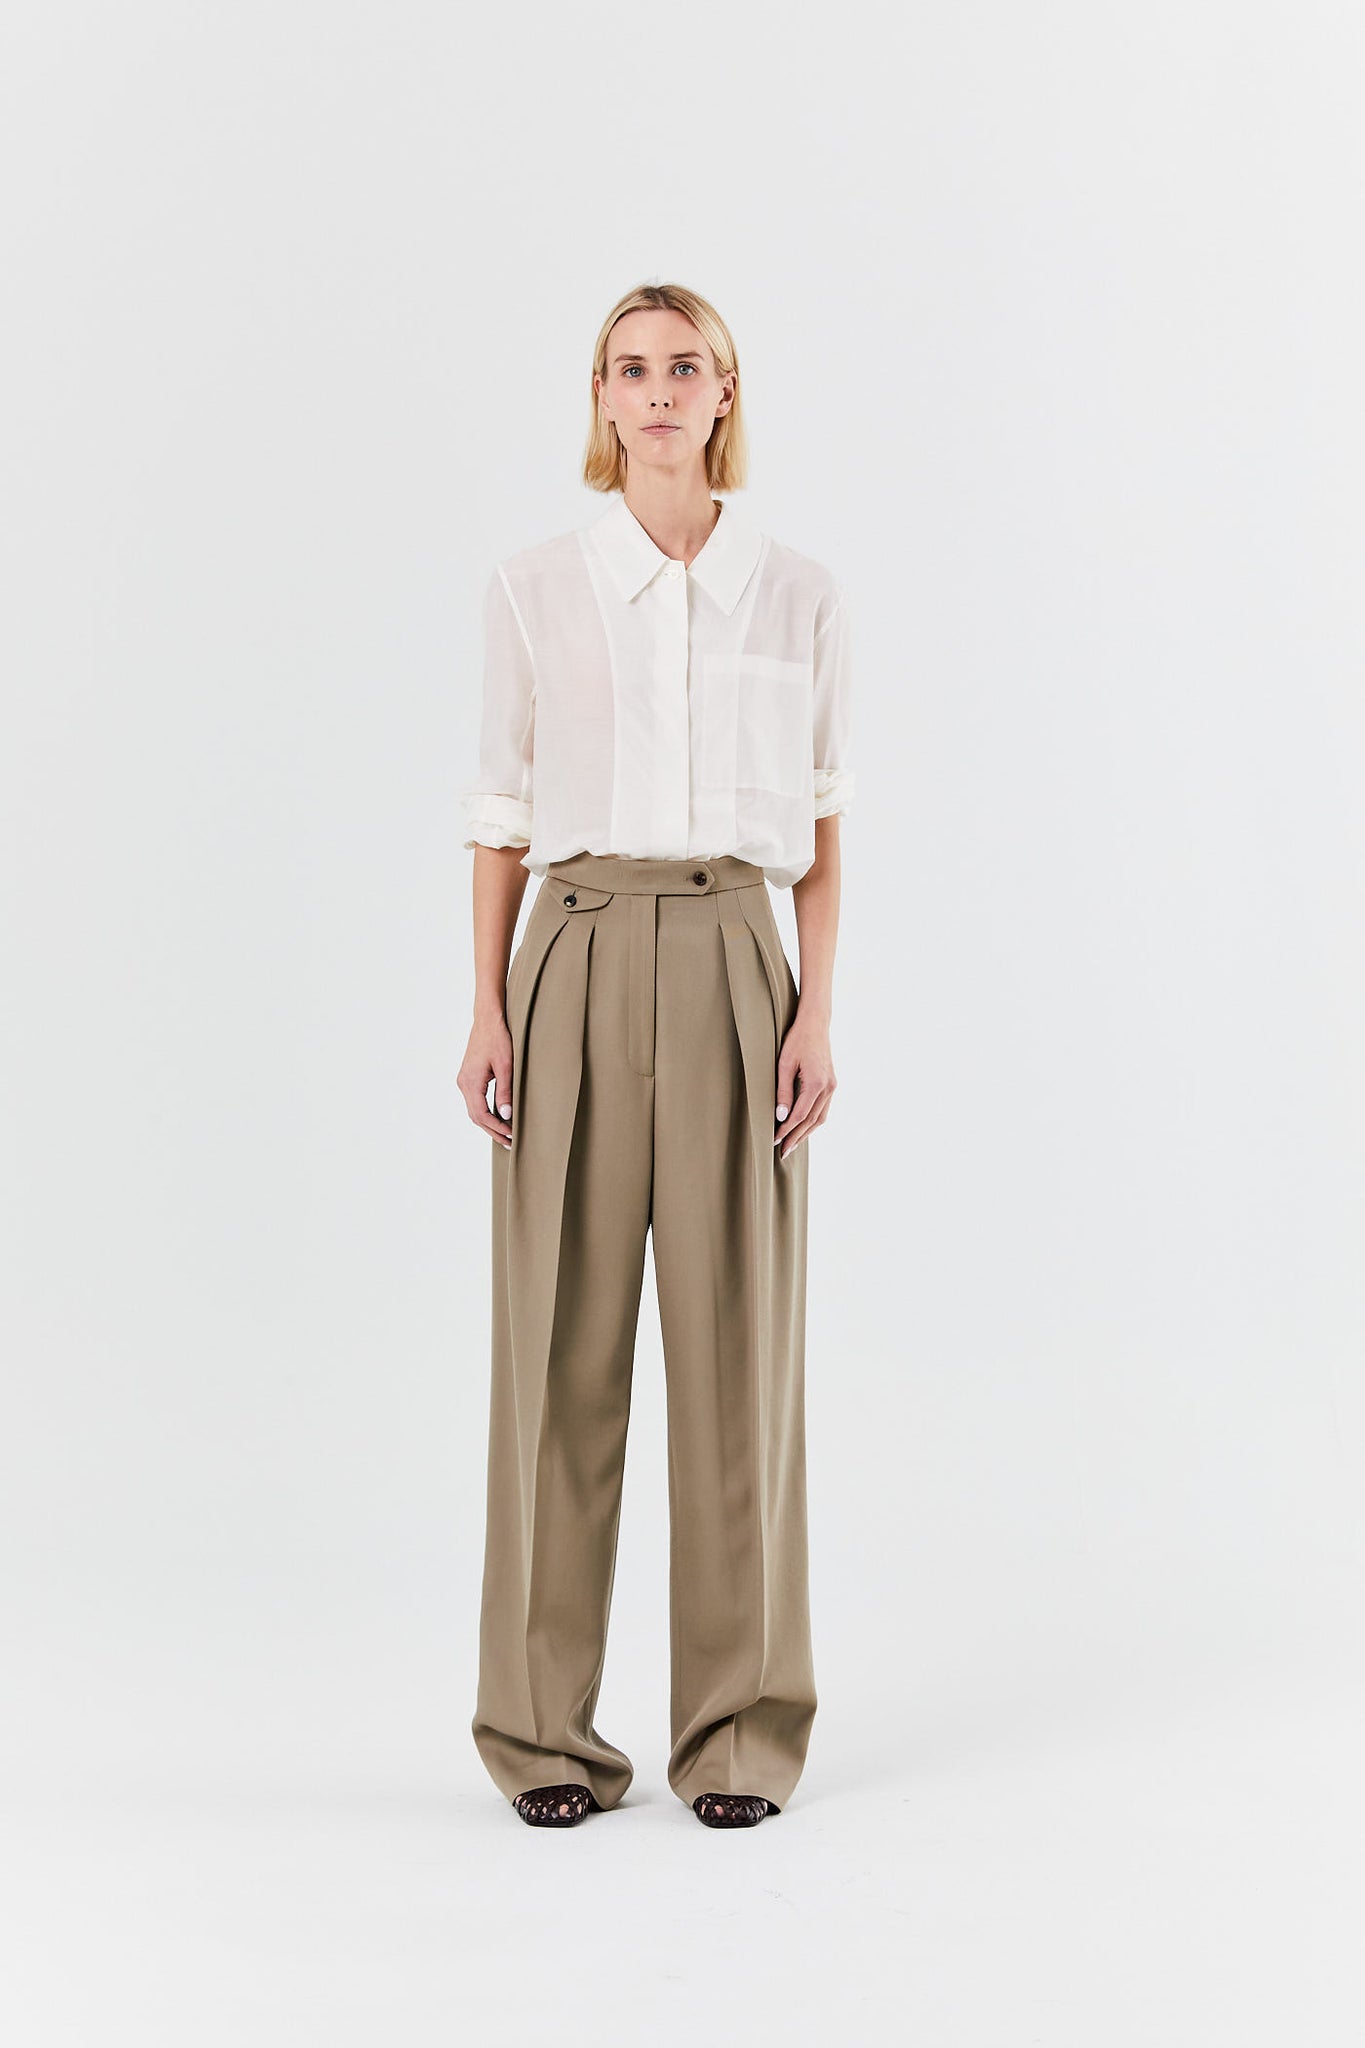 The Row, Marcellita Pleated Wool And Mohair-blend Piqué Wide-leg Pants, Black, US0,US2,US4,US6,US8,US10,US12,US14